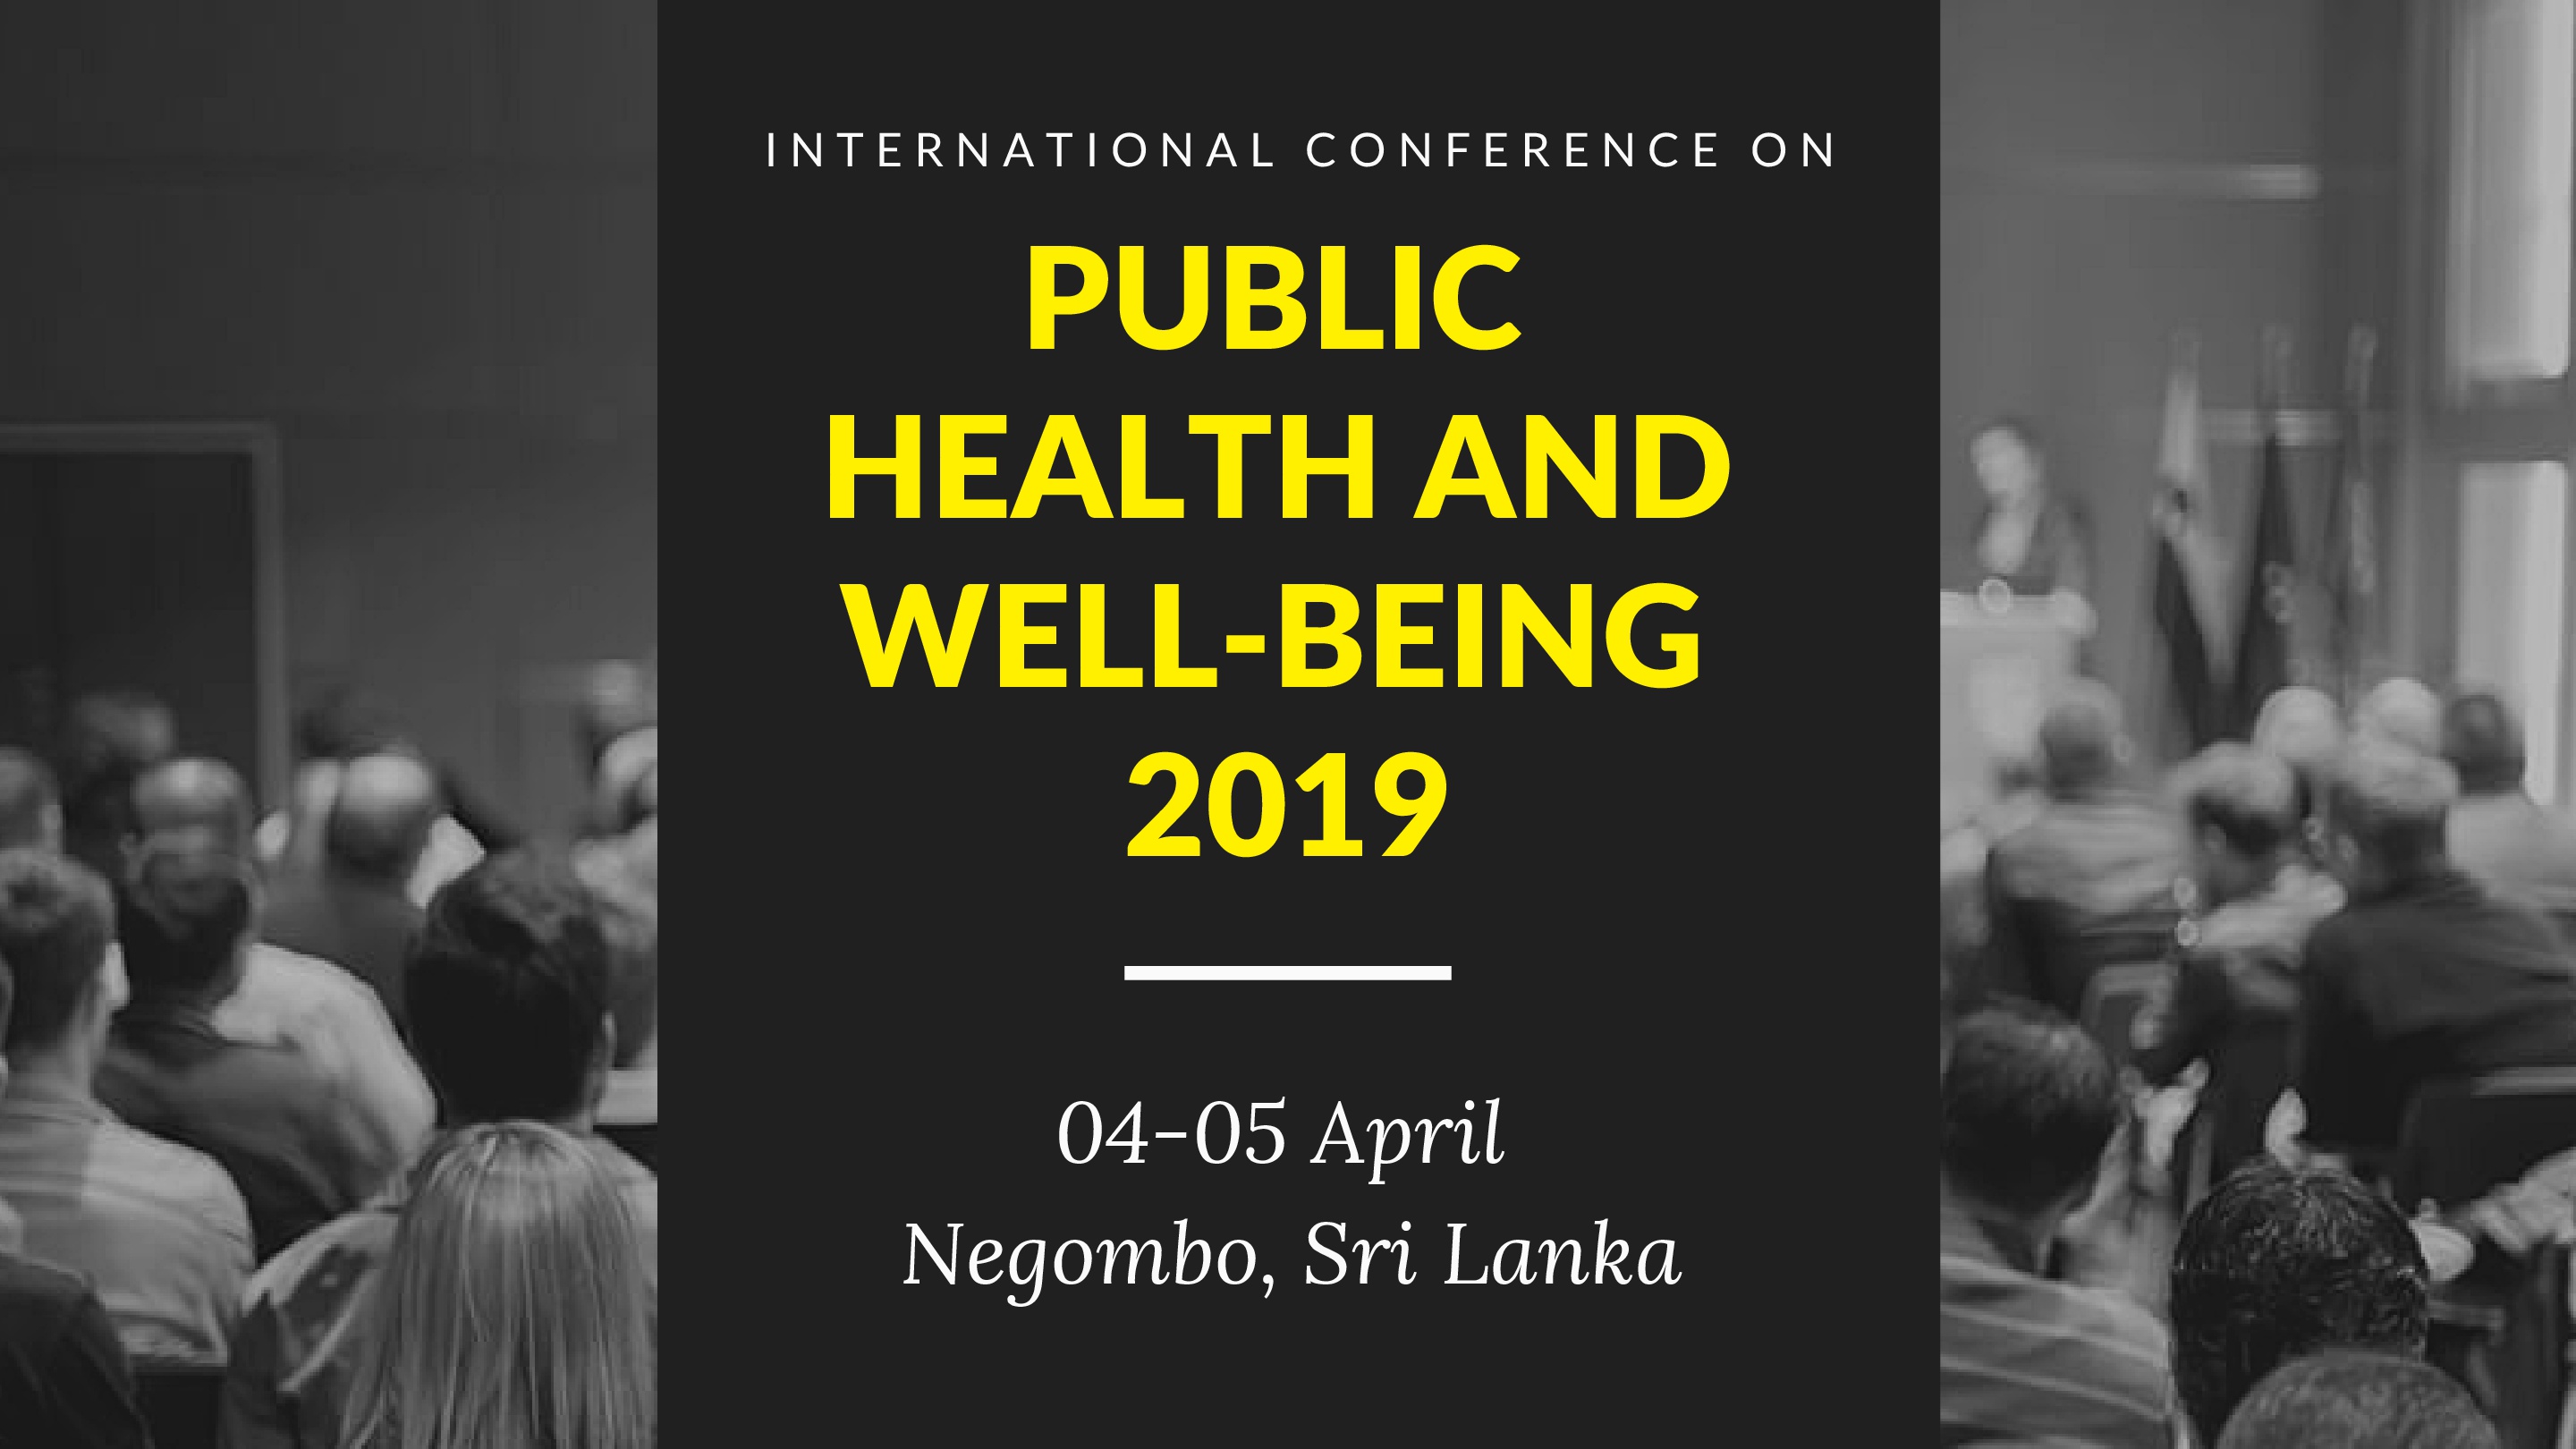 International Conference on Public Health and Well-being, Heritance Negombo, Sri Lanka